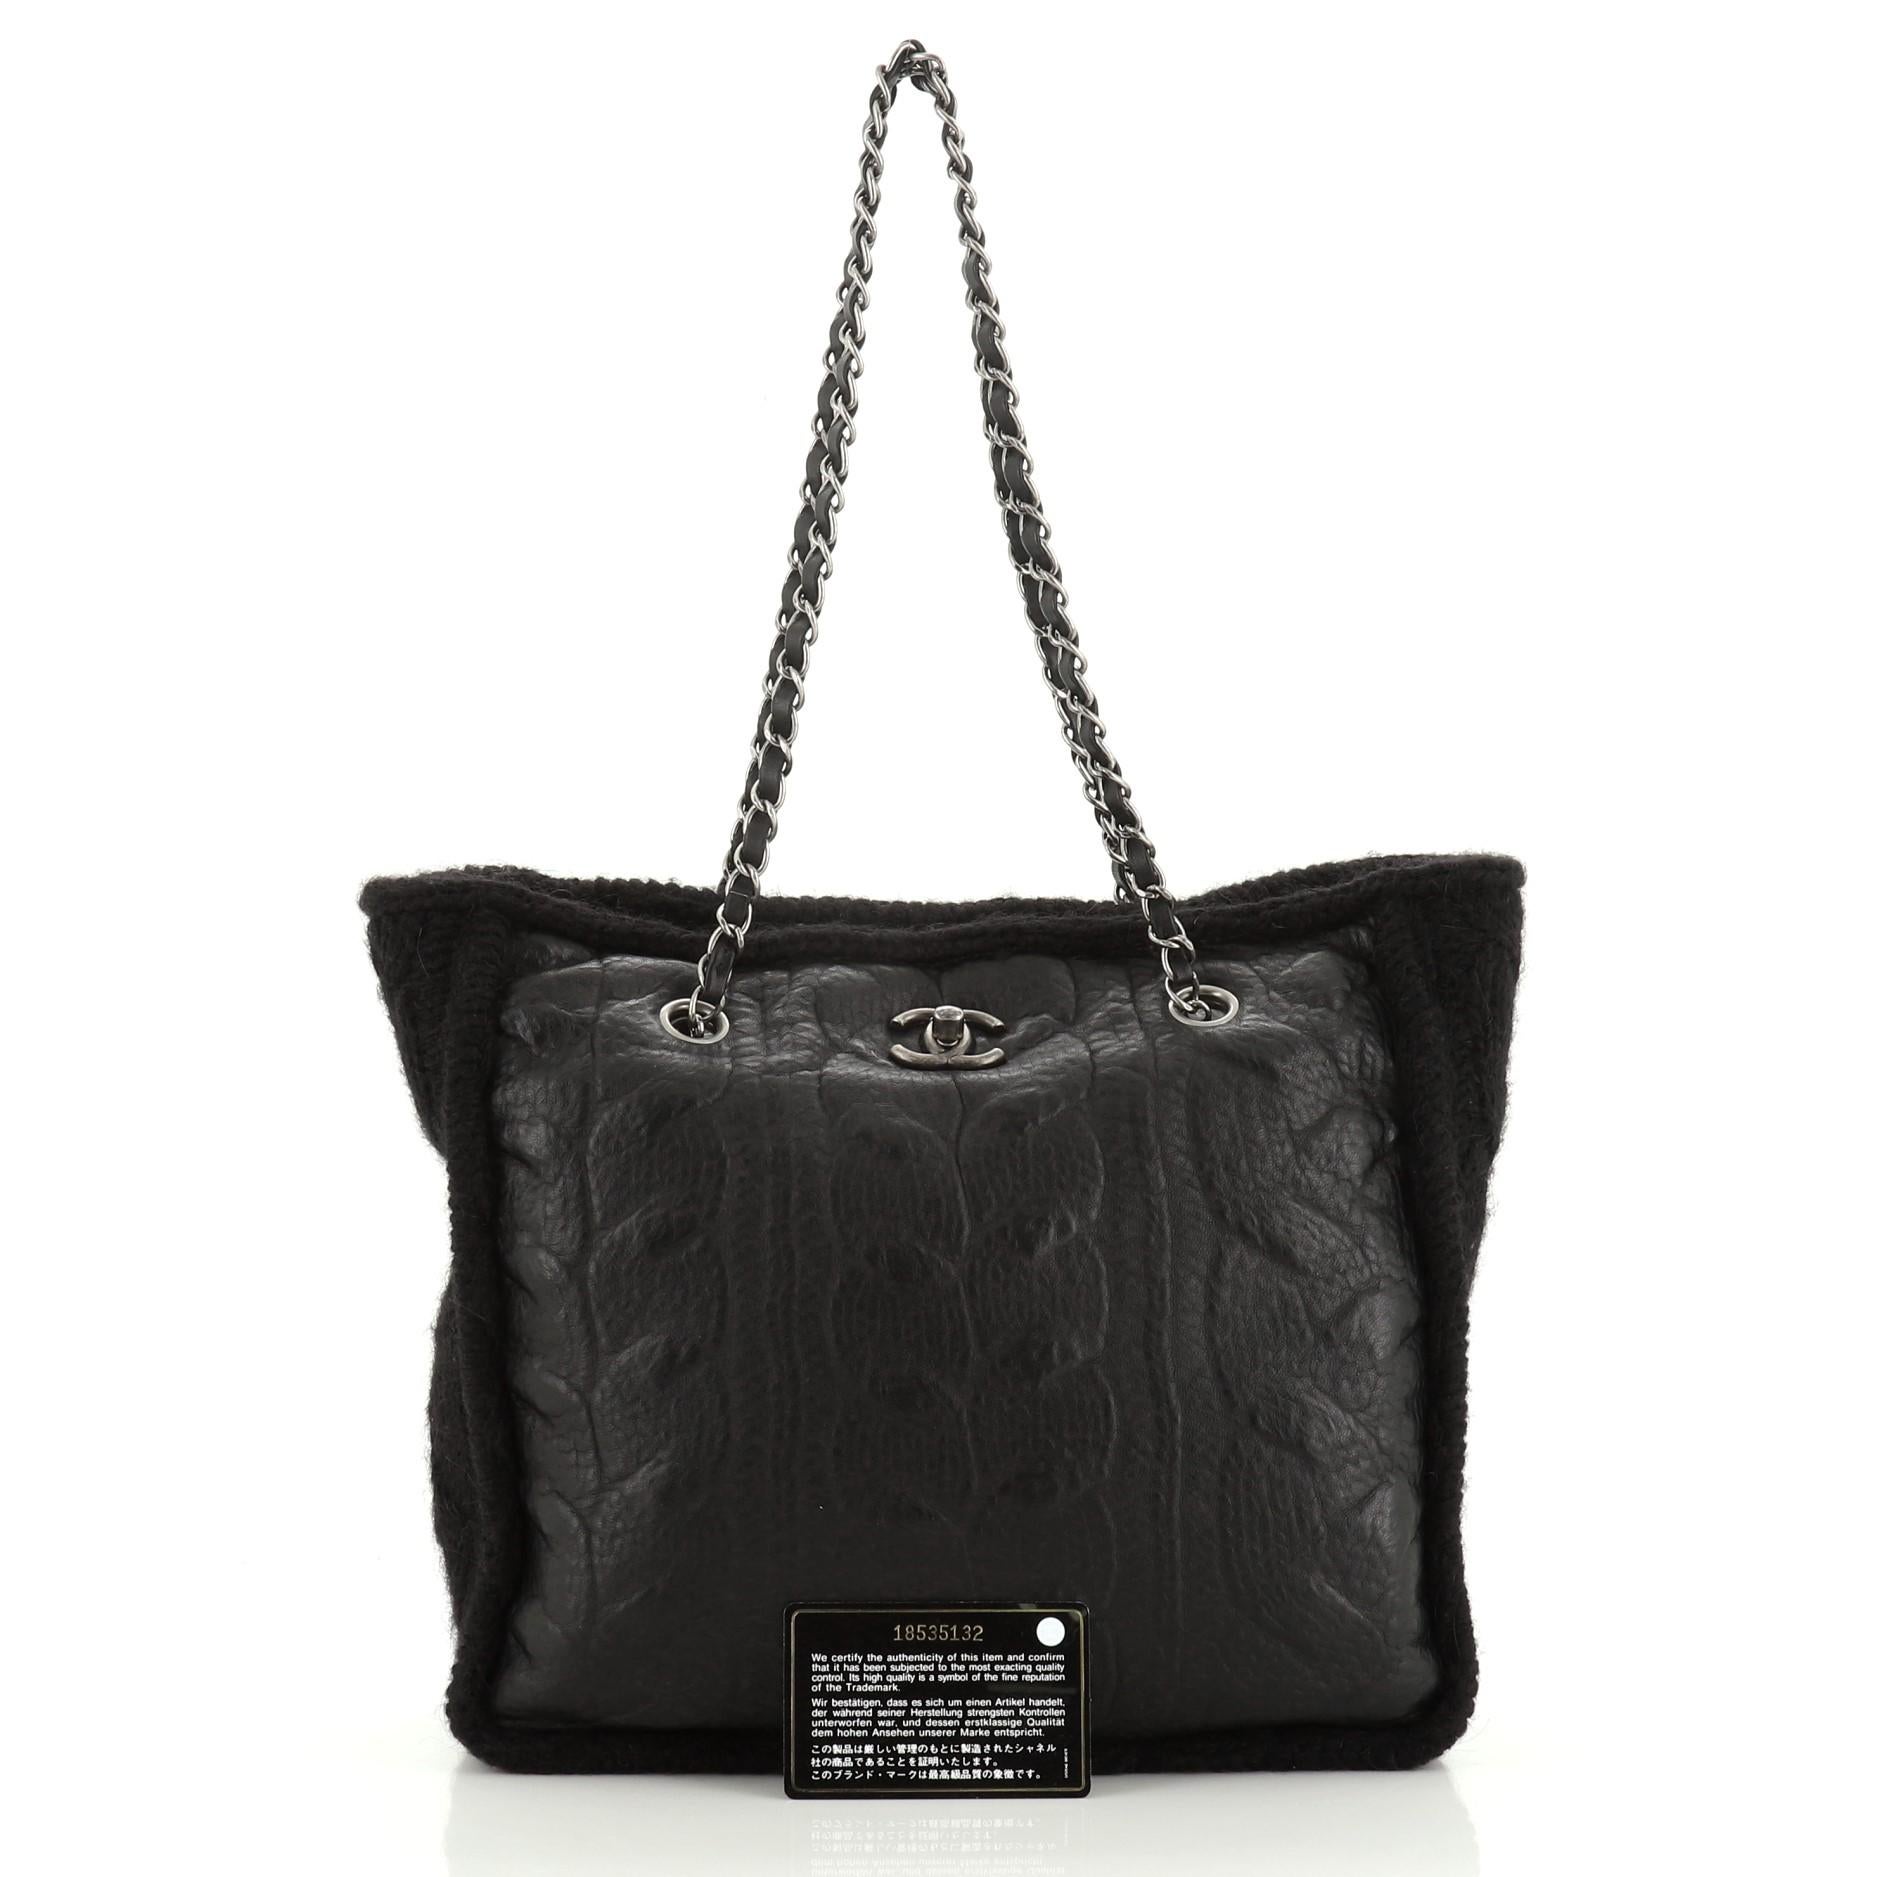 This Chanel Chic Knit Tote Sheepskin and Wool Medium, crafted from black wool and leather, features a woven in chain link strap, CC logo at the front, and aged silver tone hardware. Its closure opens to a black leather interior. Hologram sticker